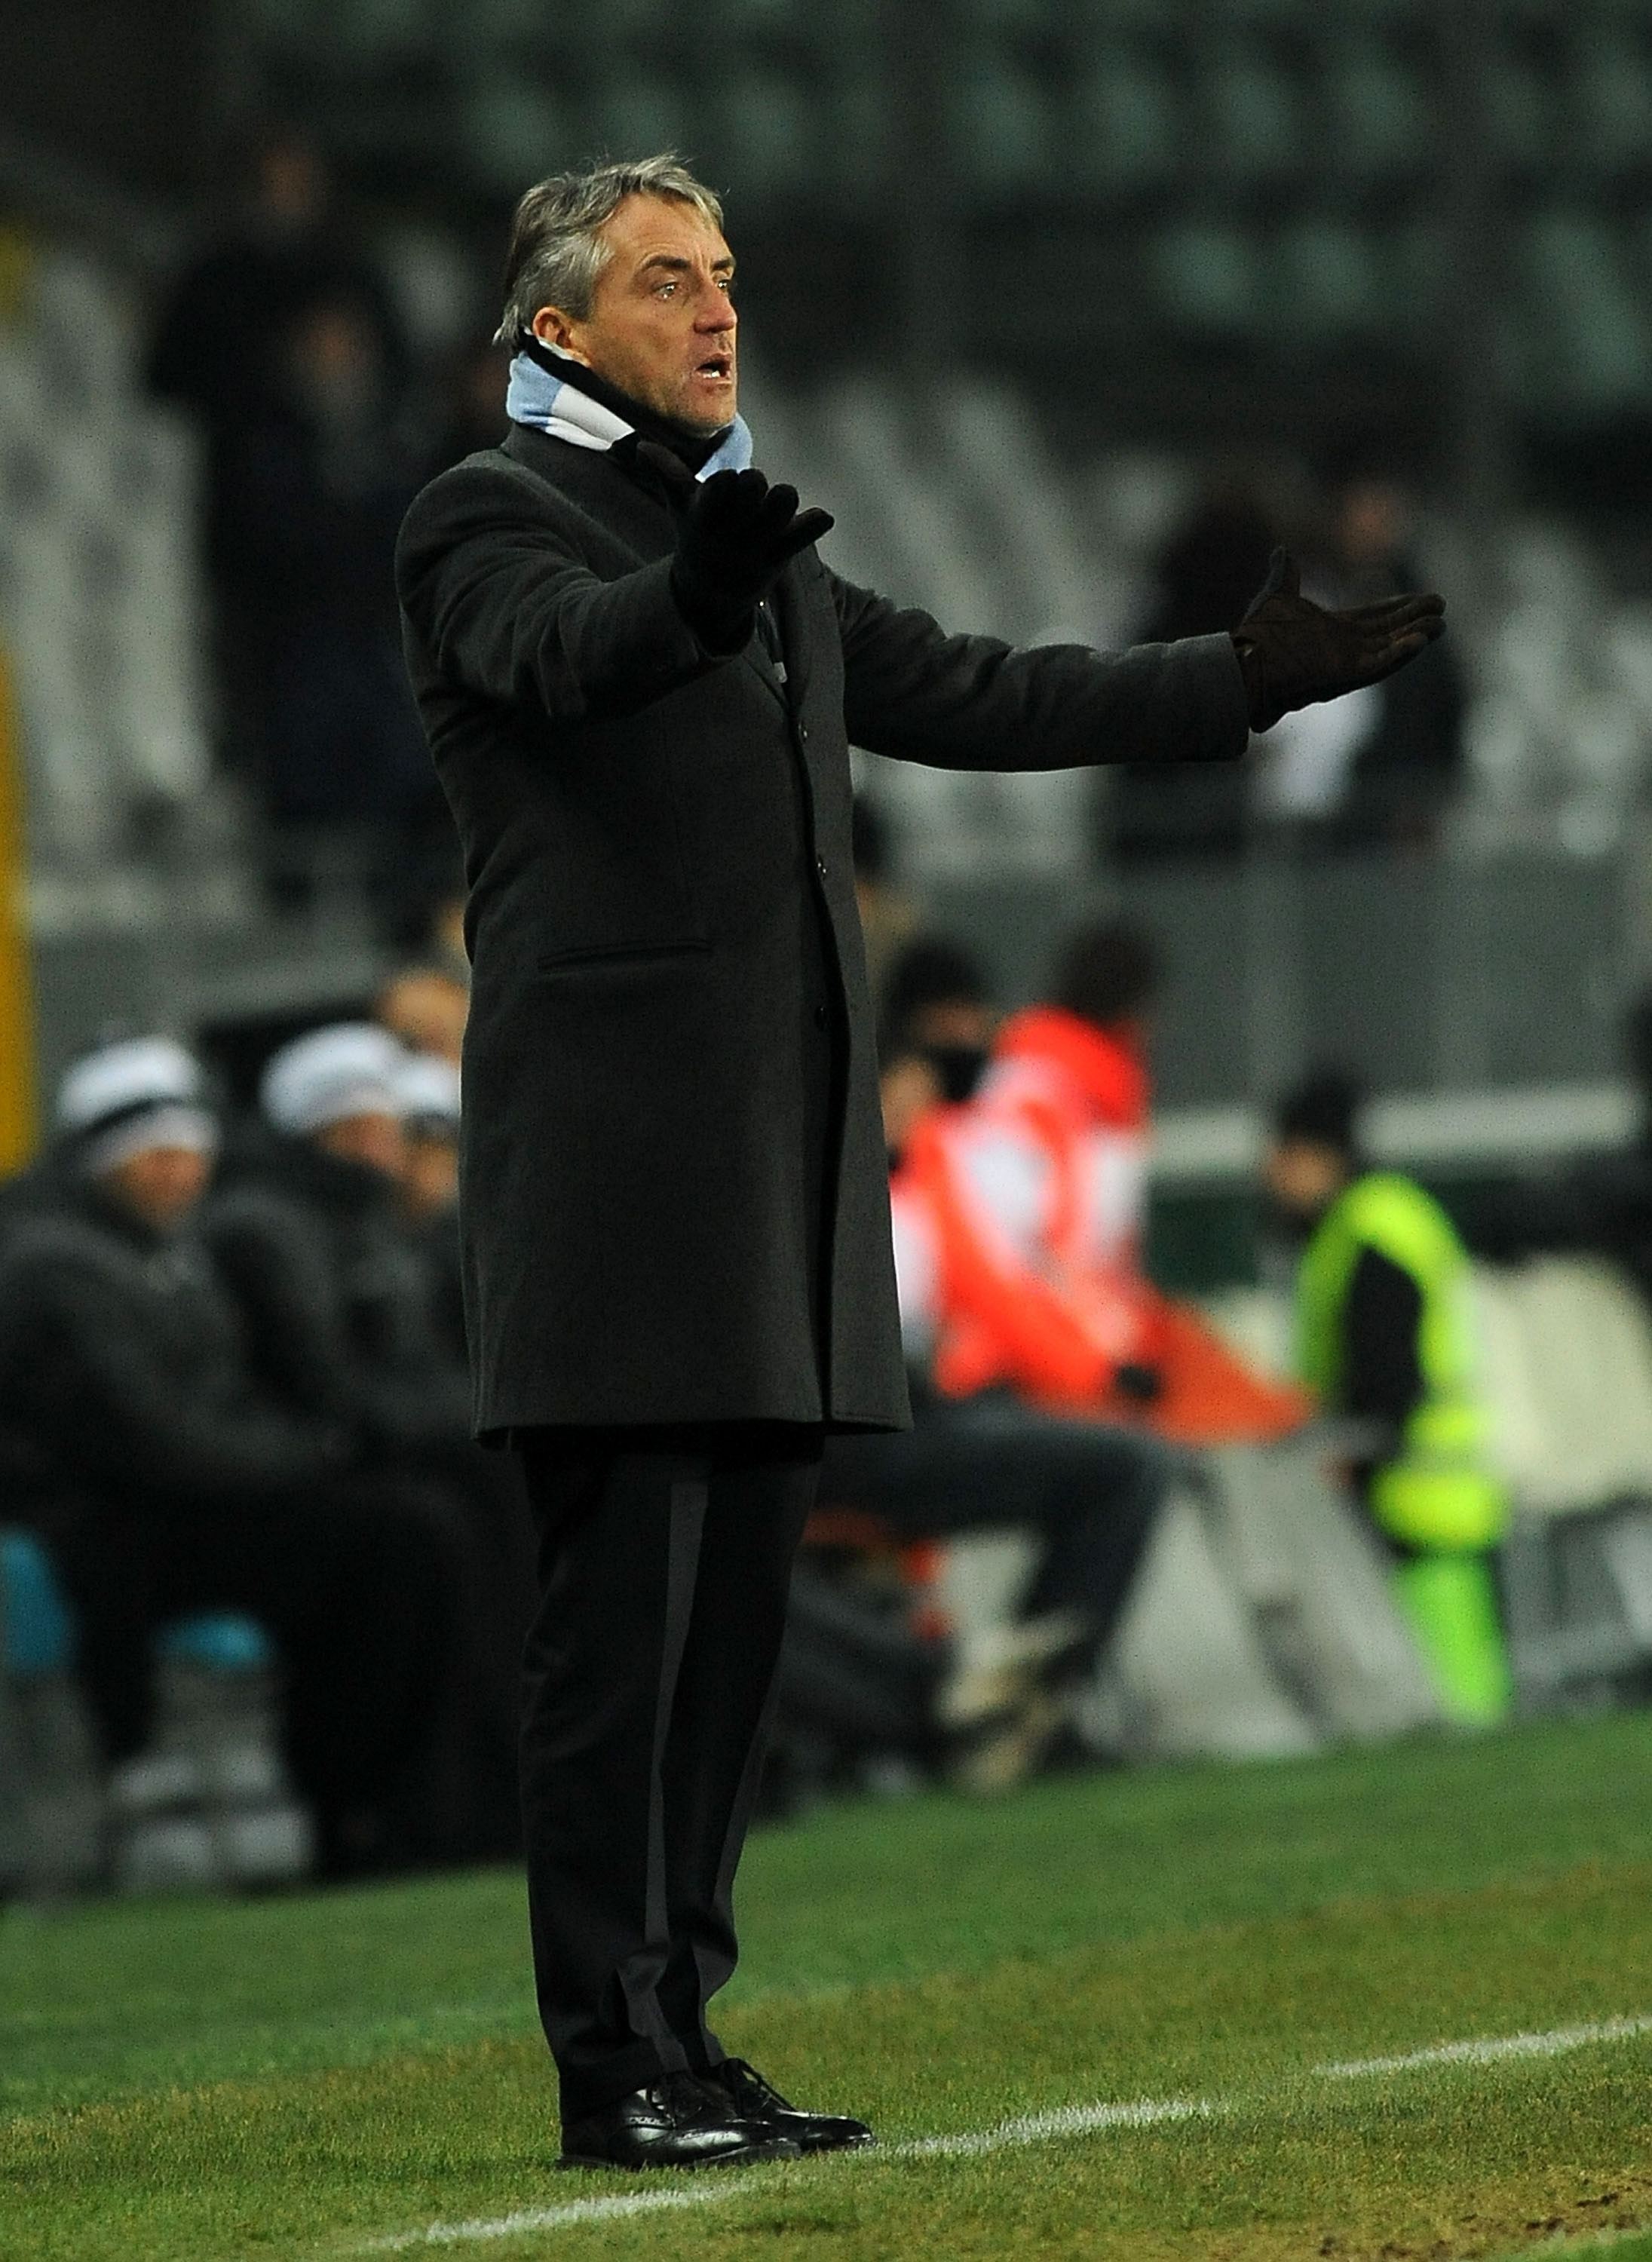 TURIN, ITALY - DECEMBER 16: Head coach Roberto Mancini of Manchester City reacts during the UEFA Europa League group A match between Juventus FC and Manchester City at Stadio Olimpico di Torino on December 16, 2010 in Turin, Italy. (Photo by Massimo Cebre